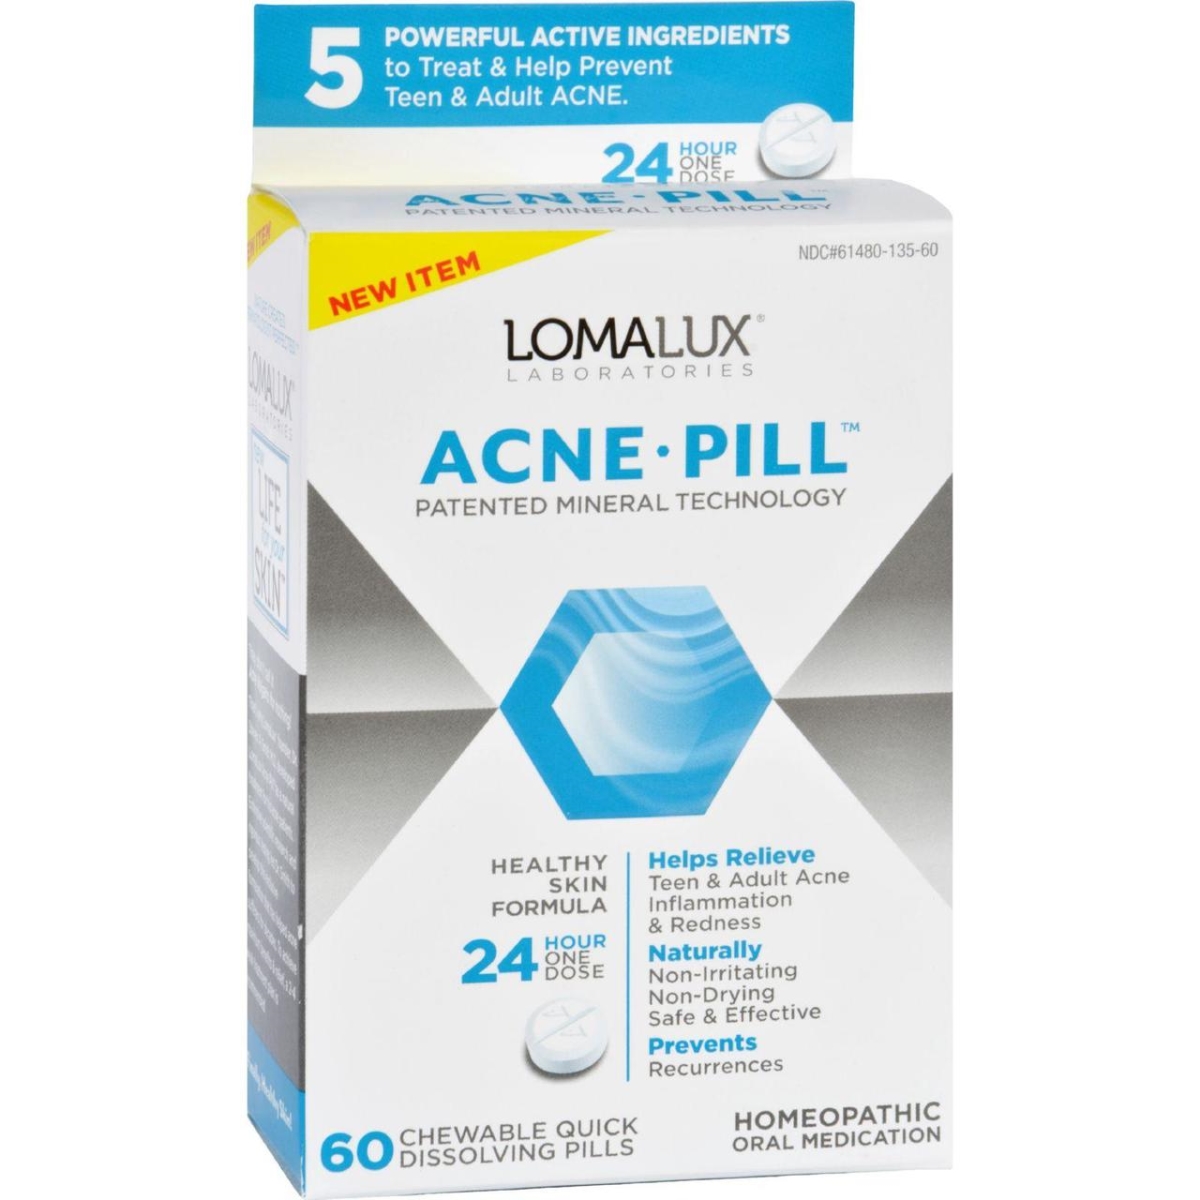 Hg1730621 Acne Pill Chewable Quick Dissolving - 60 Count